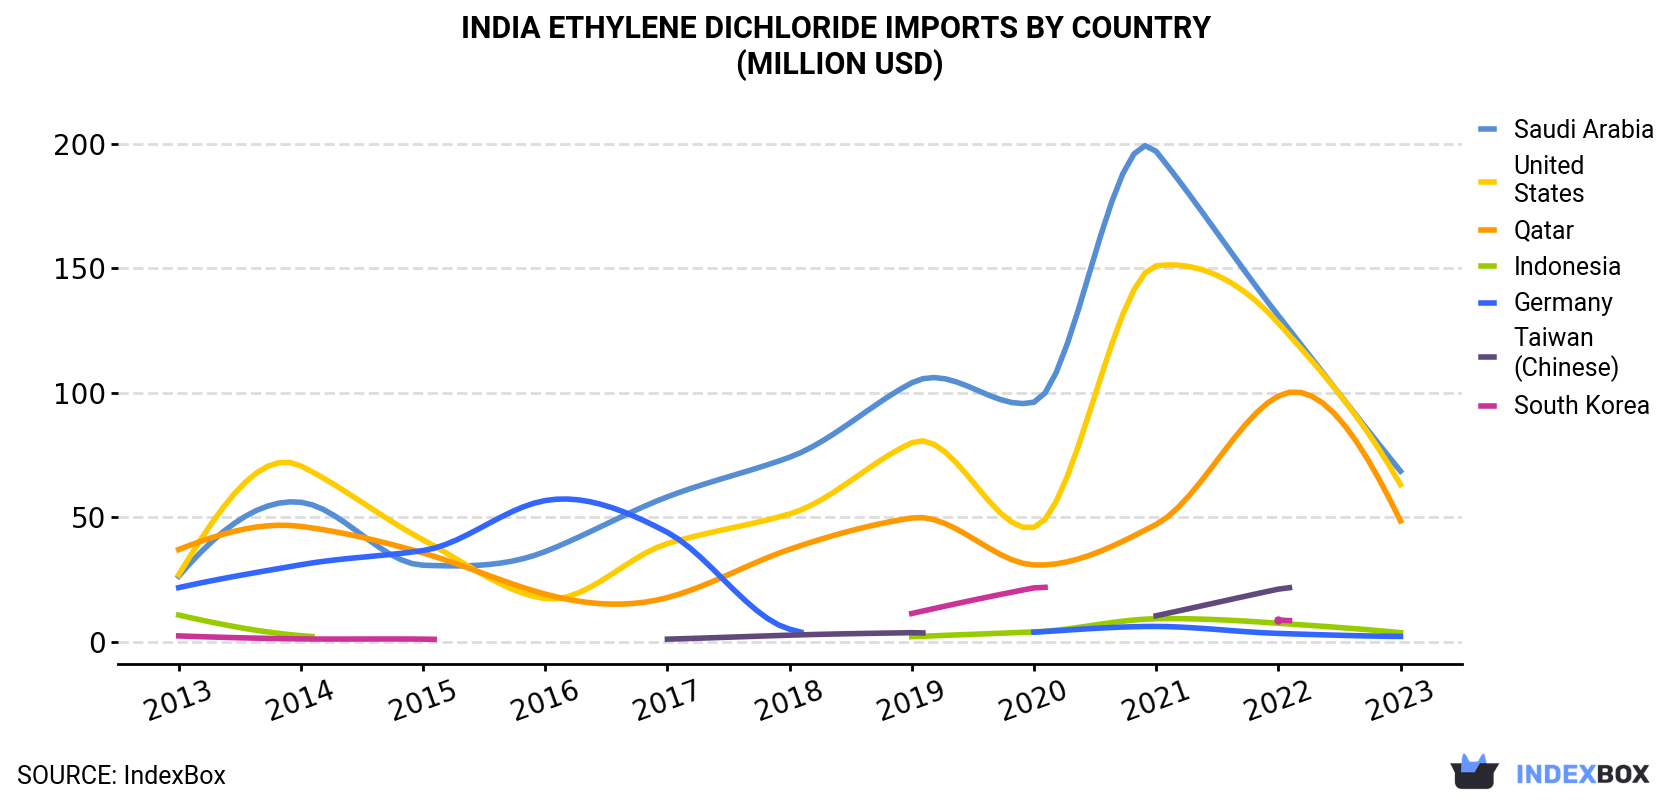 India Ethylene Dichloride Imports By Country (Million USD)